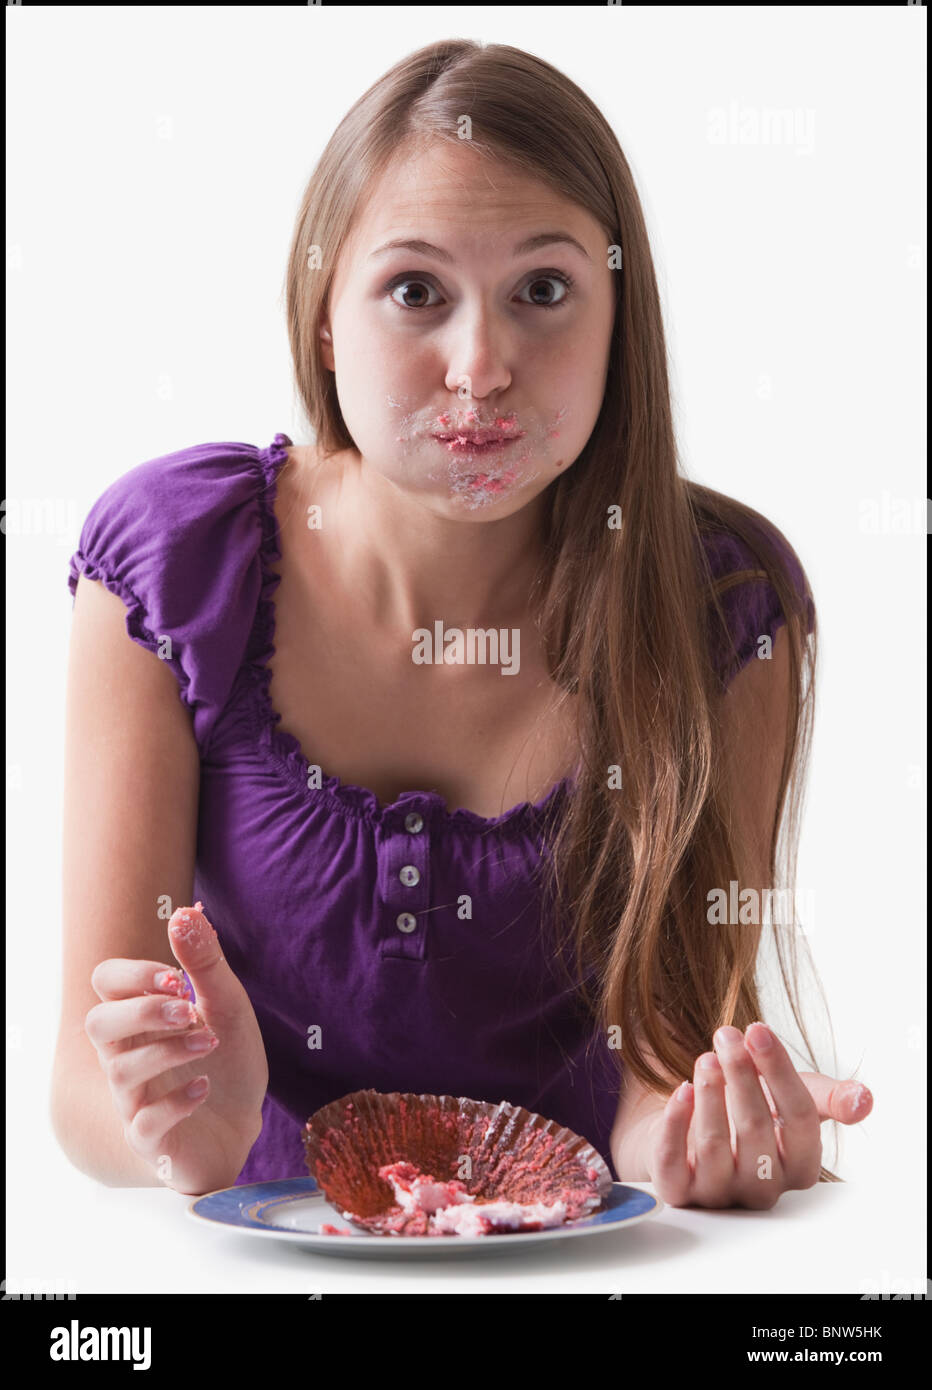 Woman with a cupcake stuffed in her mouth Stock Photo